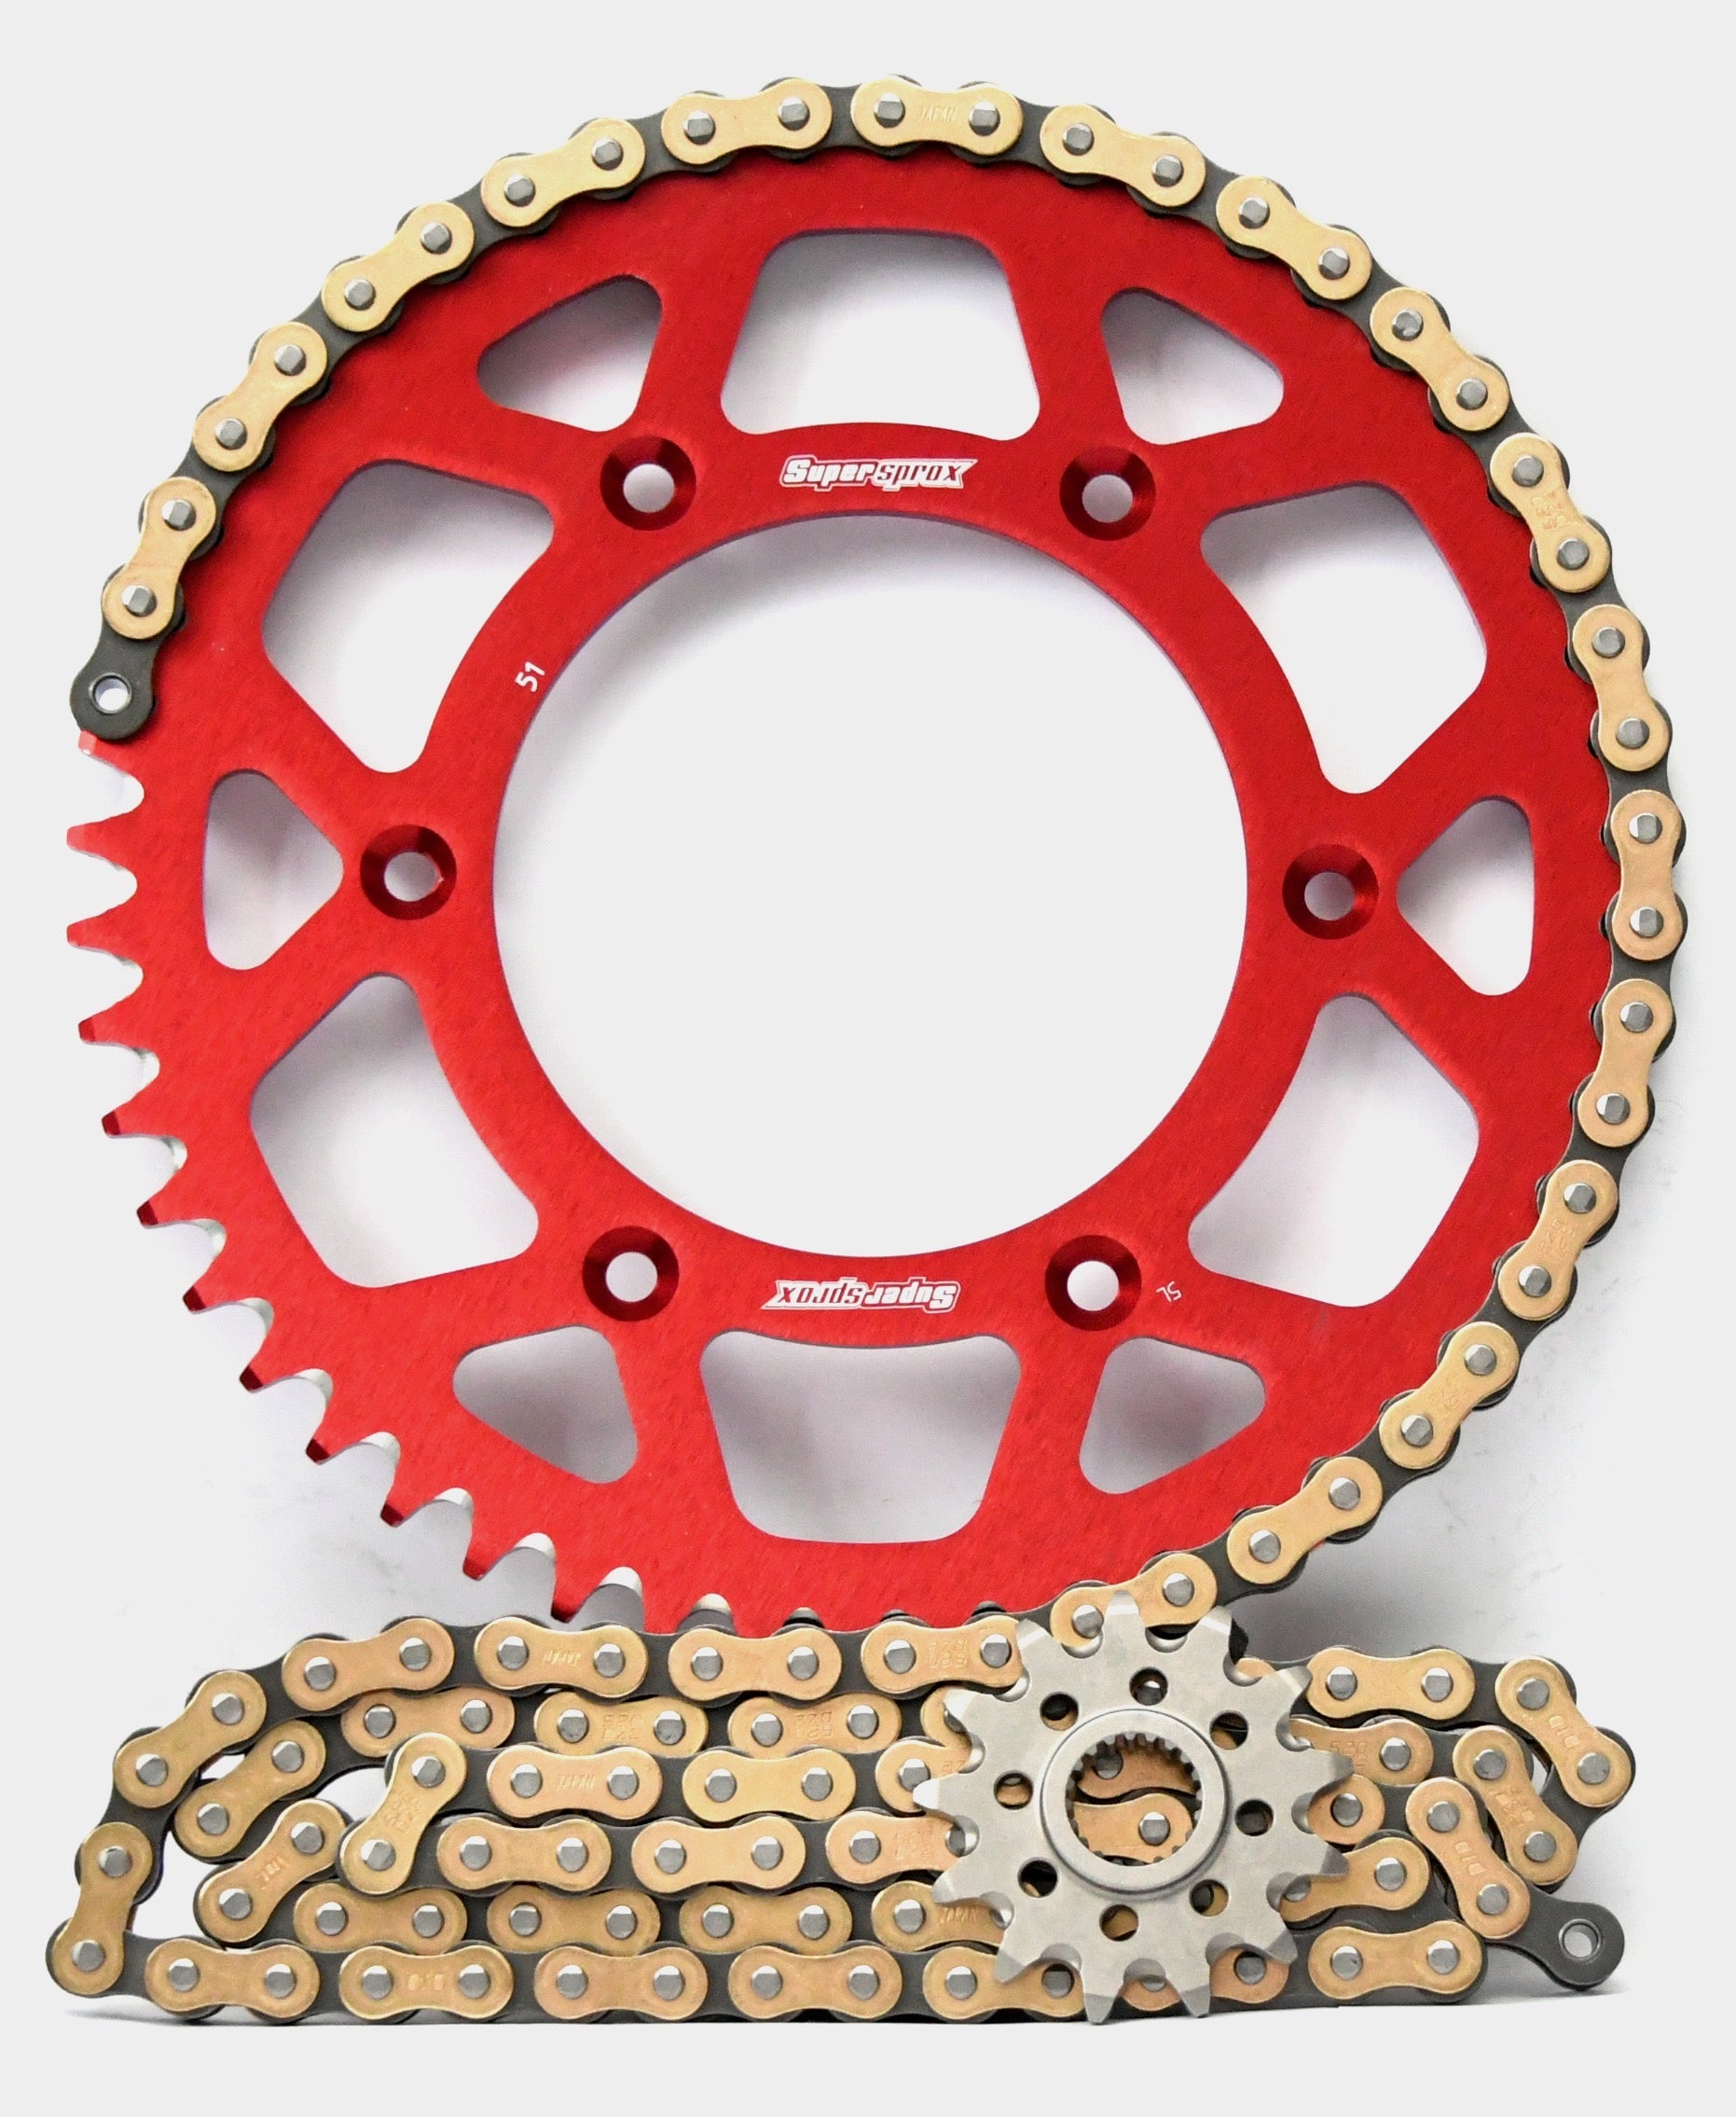 Supersprox Chain & Aluminium Sprocket Kit for Honda CR125R 2004-2007 - Choose Your Gearing - 0